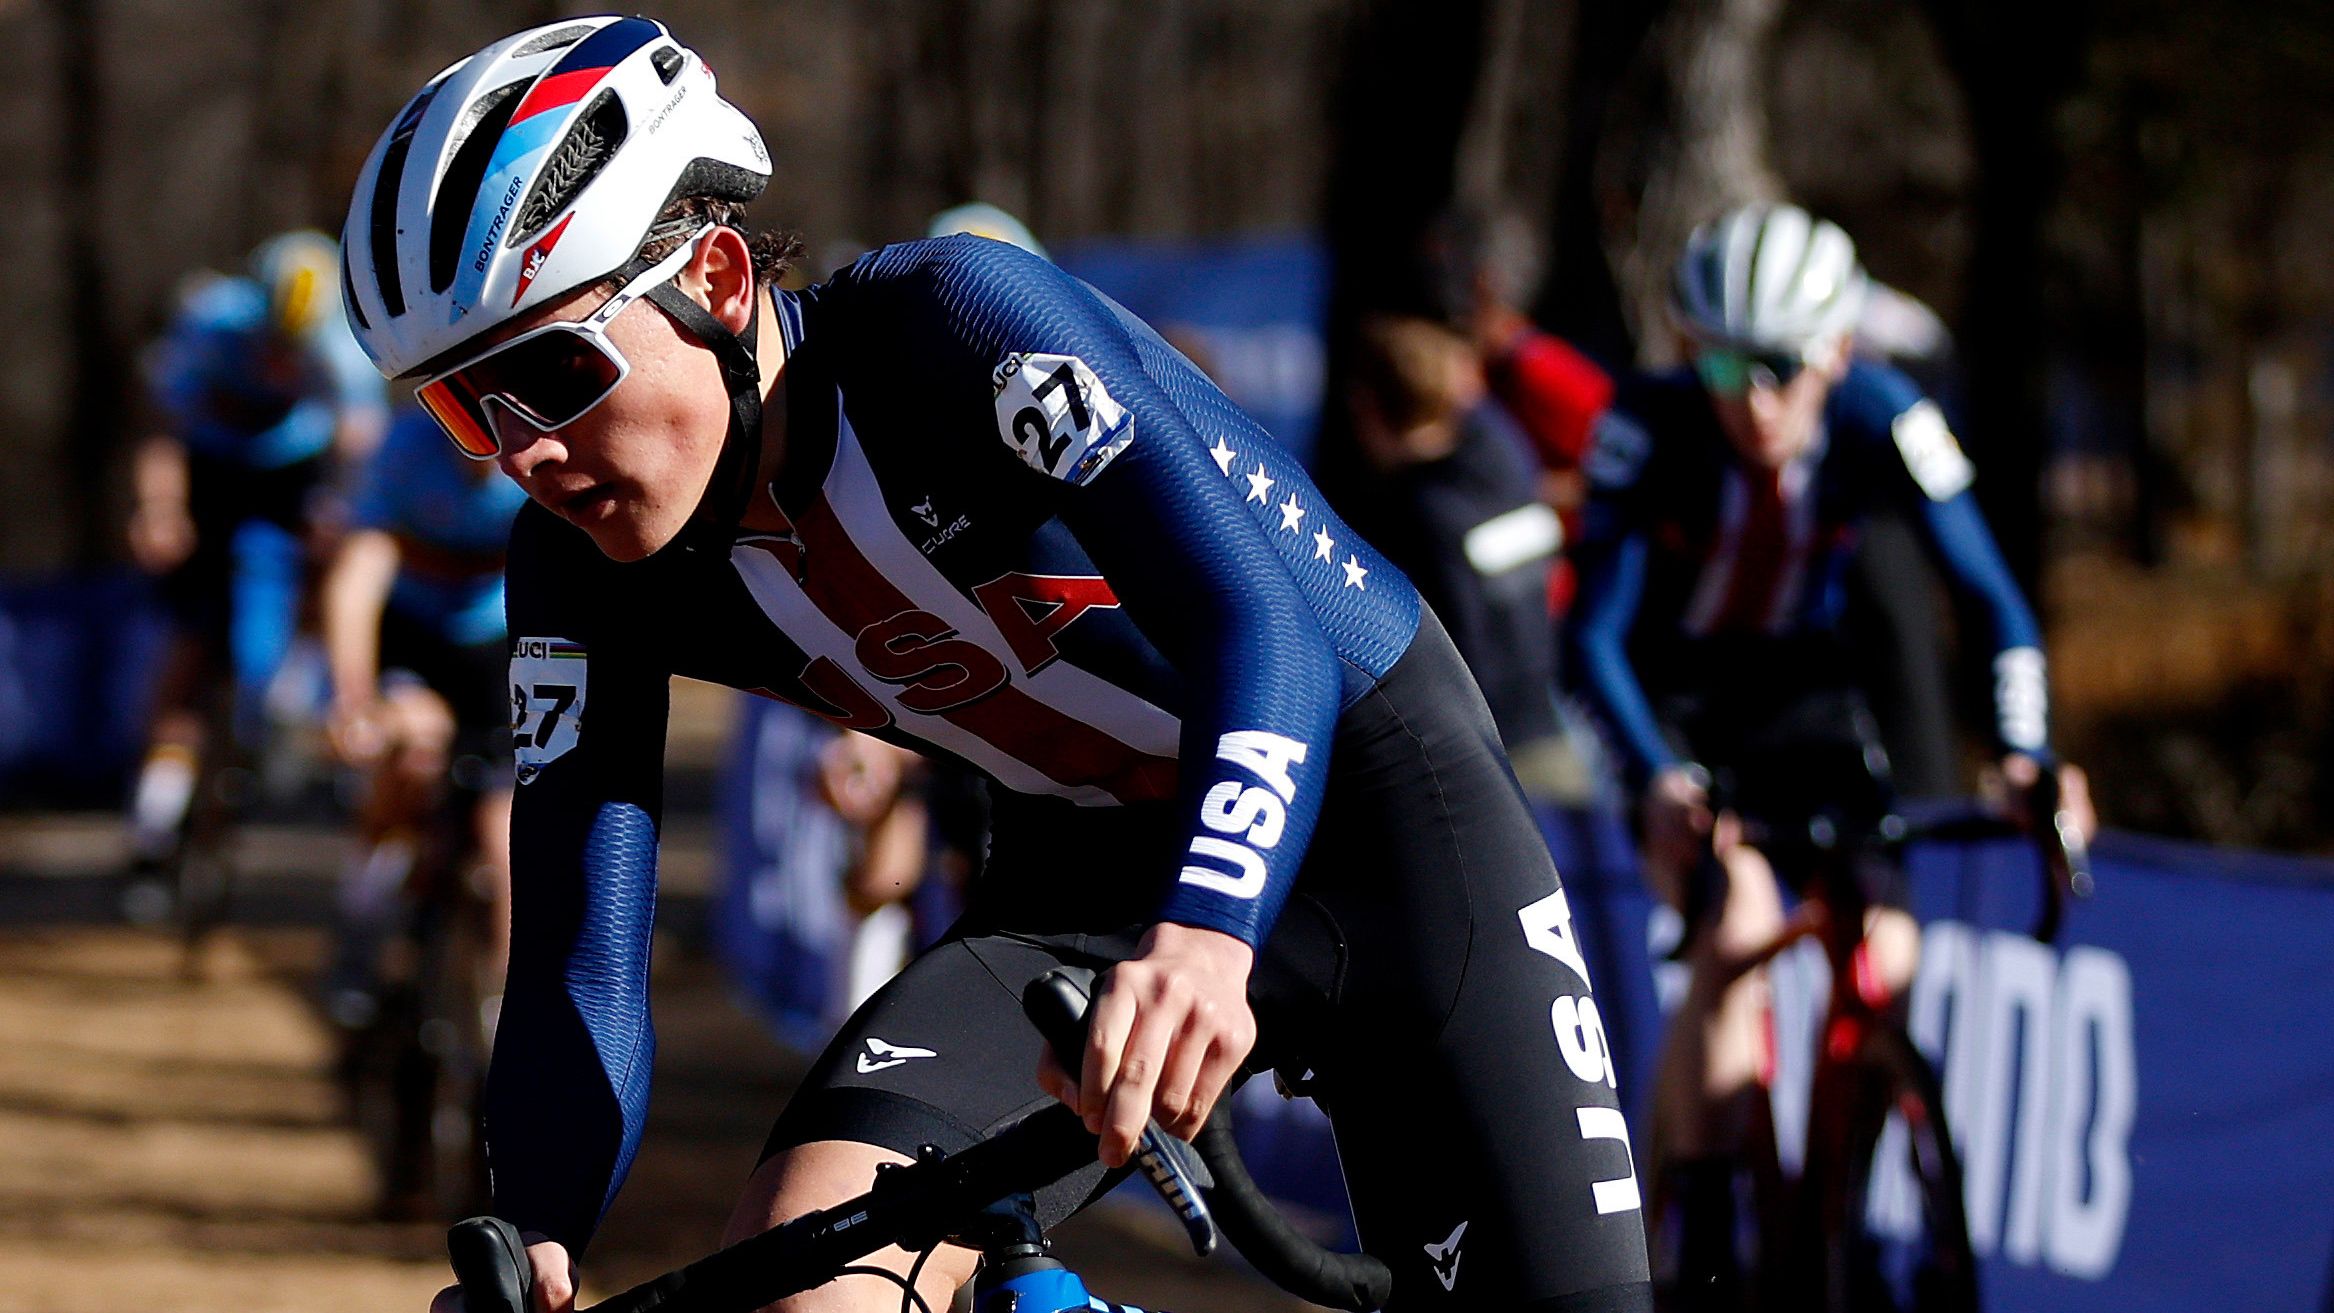 Teen American cyclist killed while training for world championships